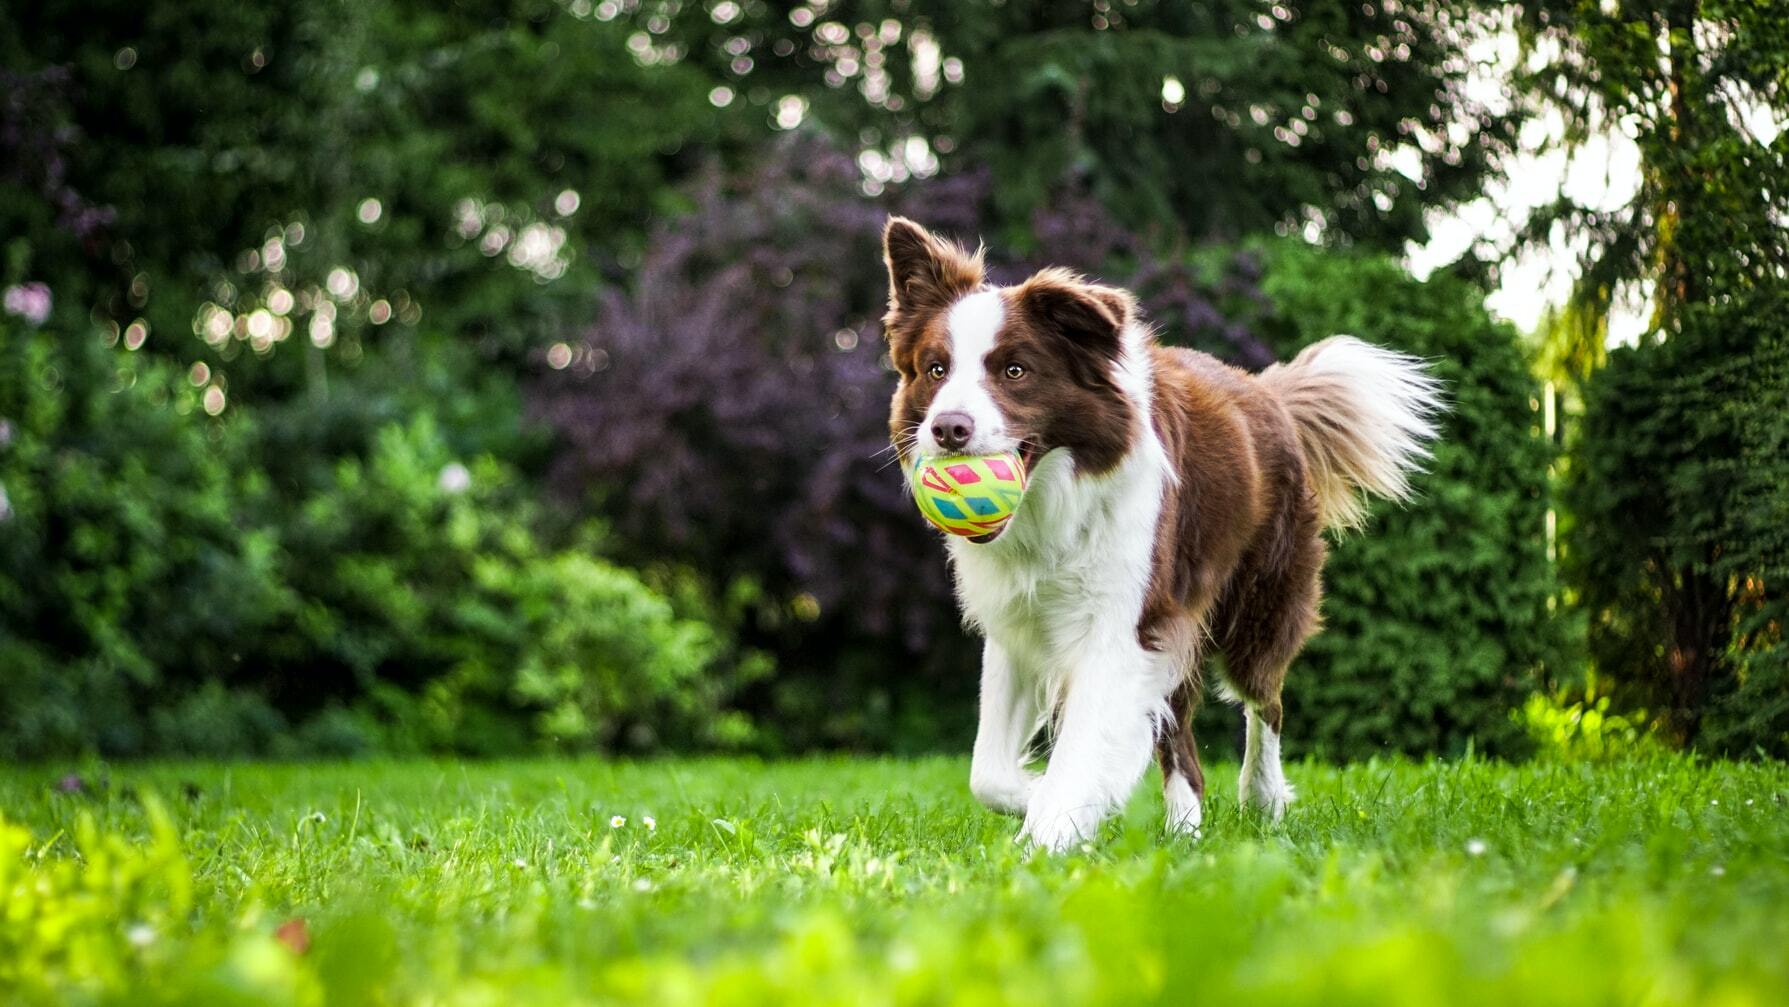 7 steps teach your dog to fetch